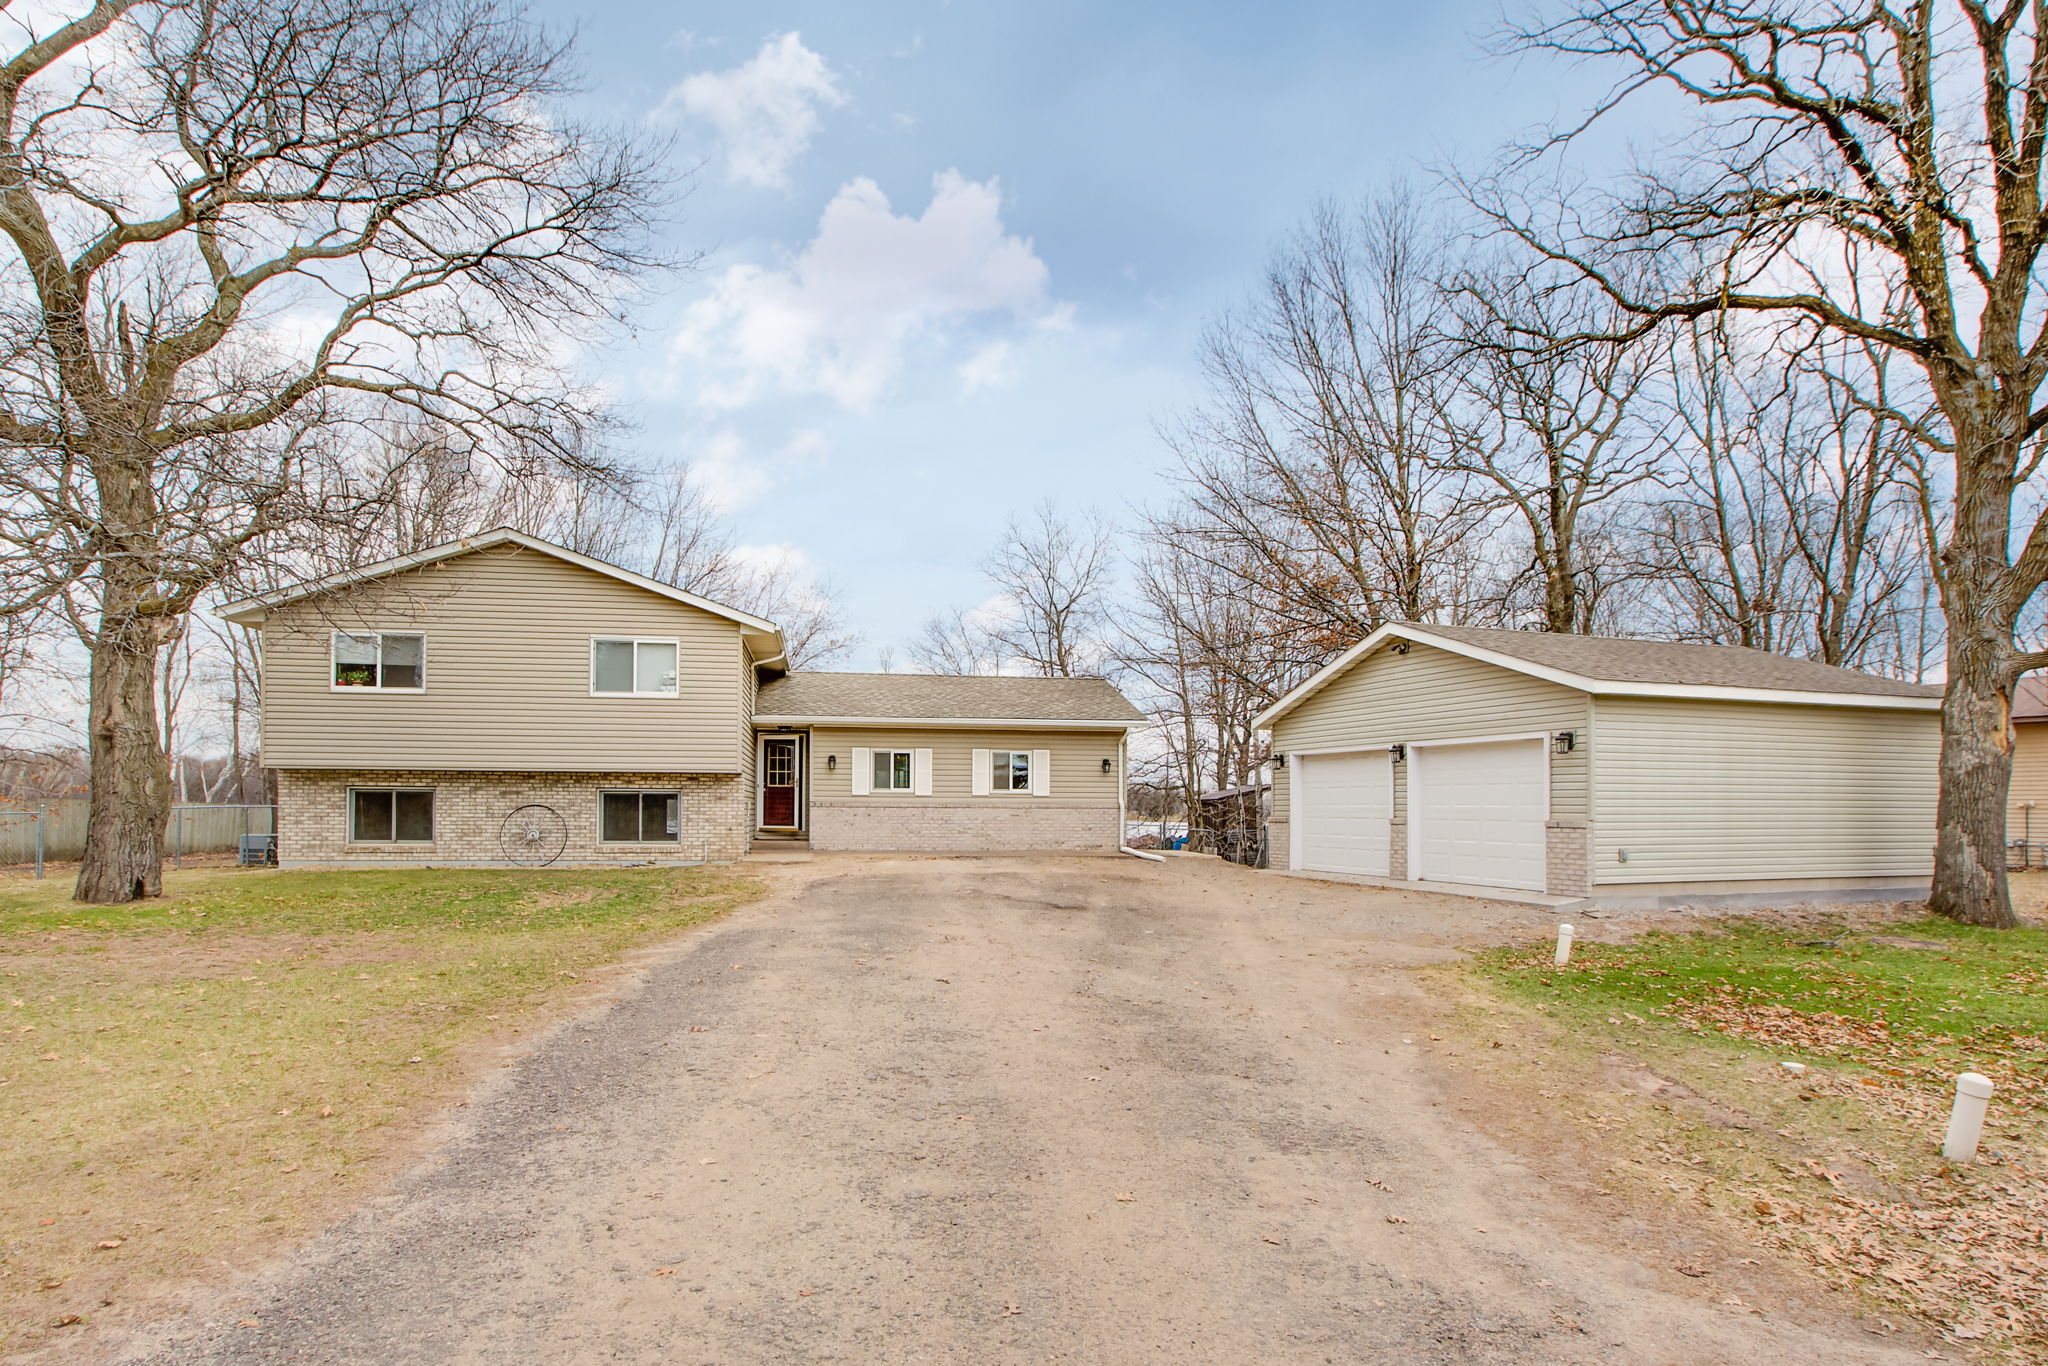  57040 314th St, Stacy, MN 55079, US